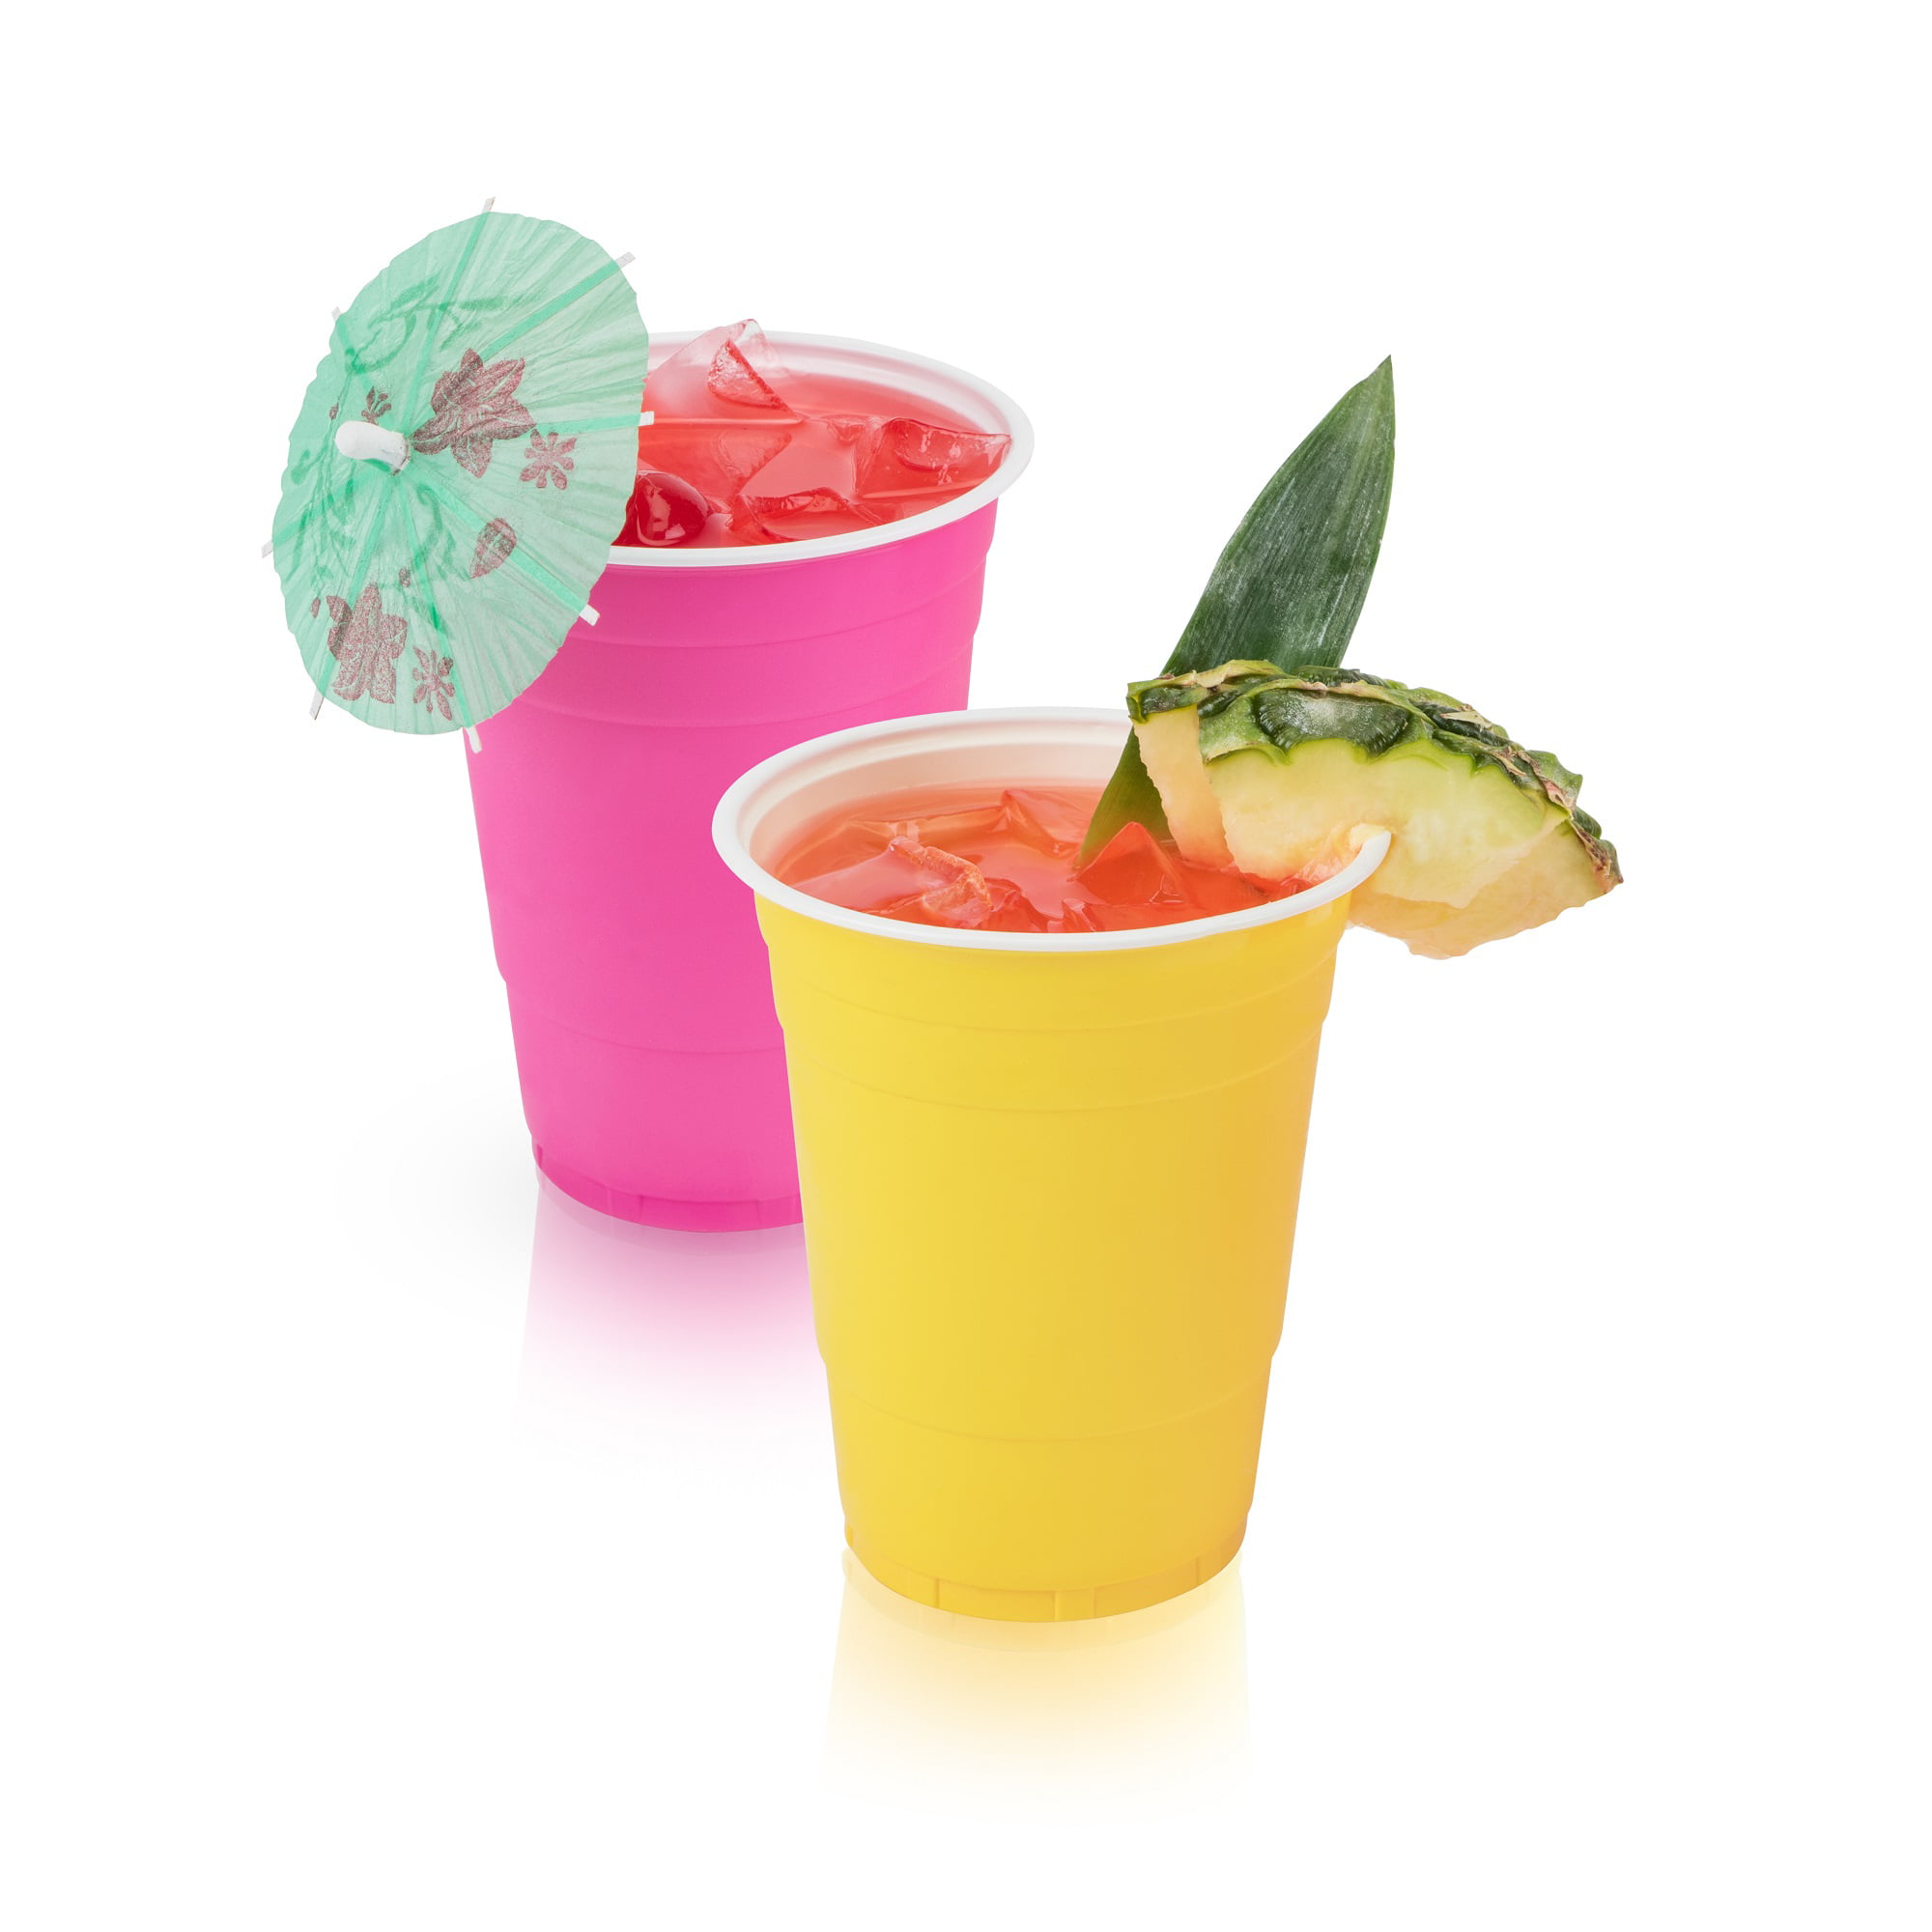 16 oz. Disposable Plastic Party Cups  Pack of 748 – Jay's Import & Export